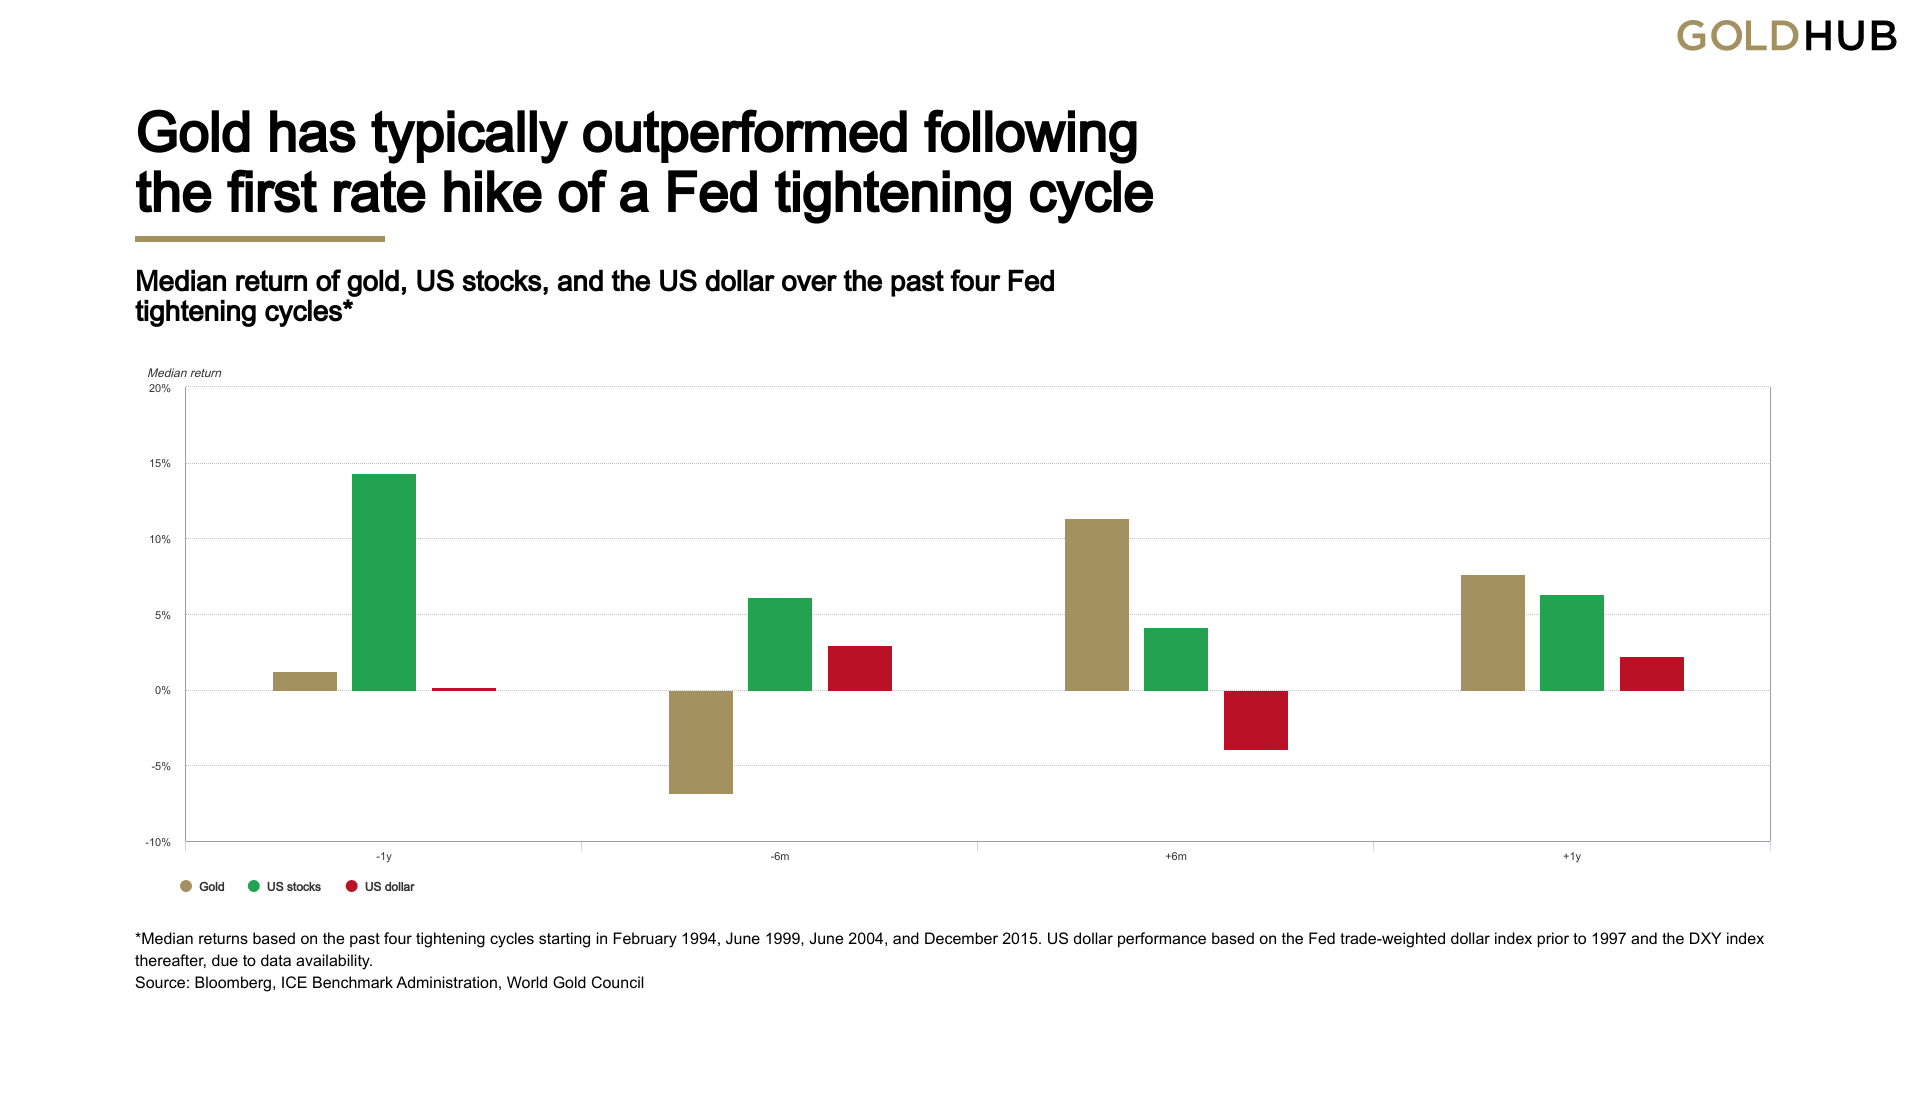 bar chart coparison showing how gold performs before, during and after first Fed rate cyclical hike